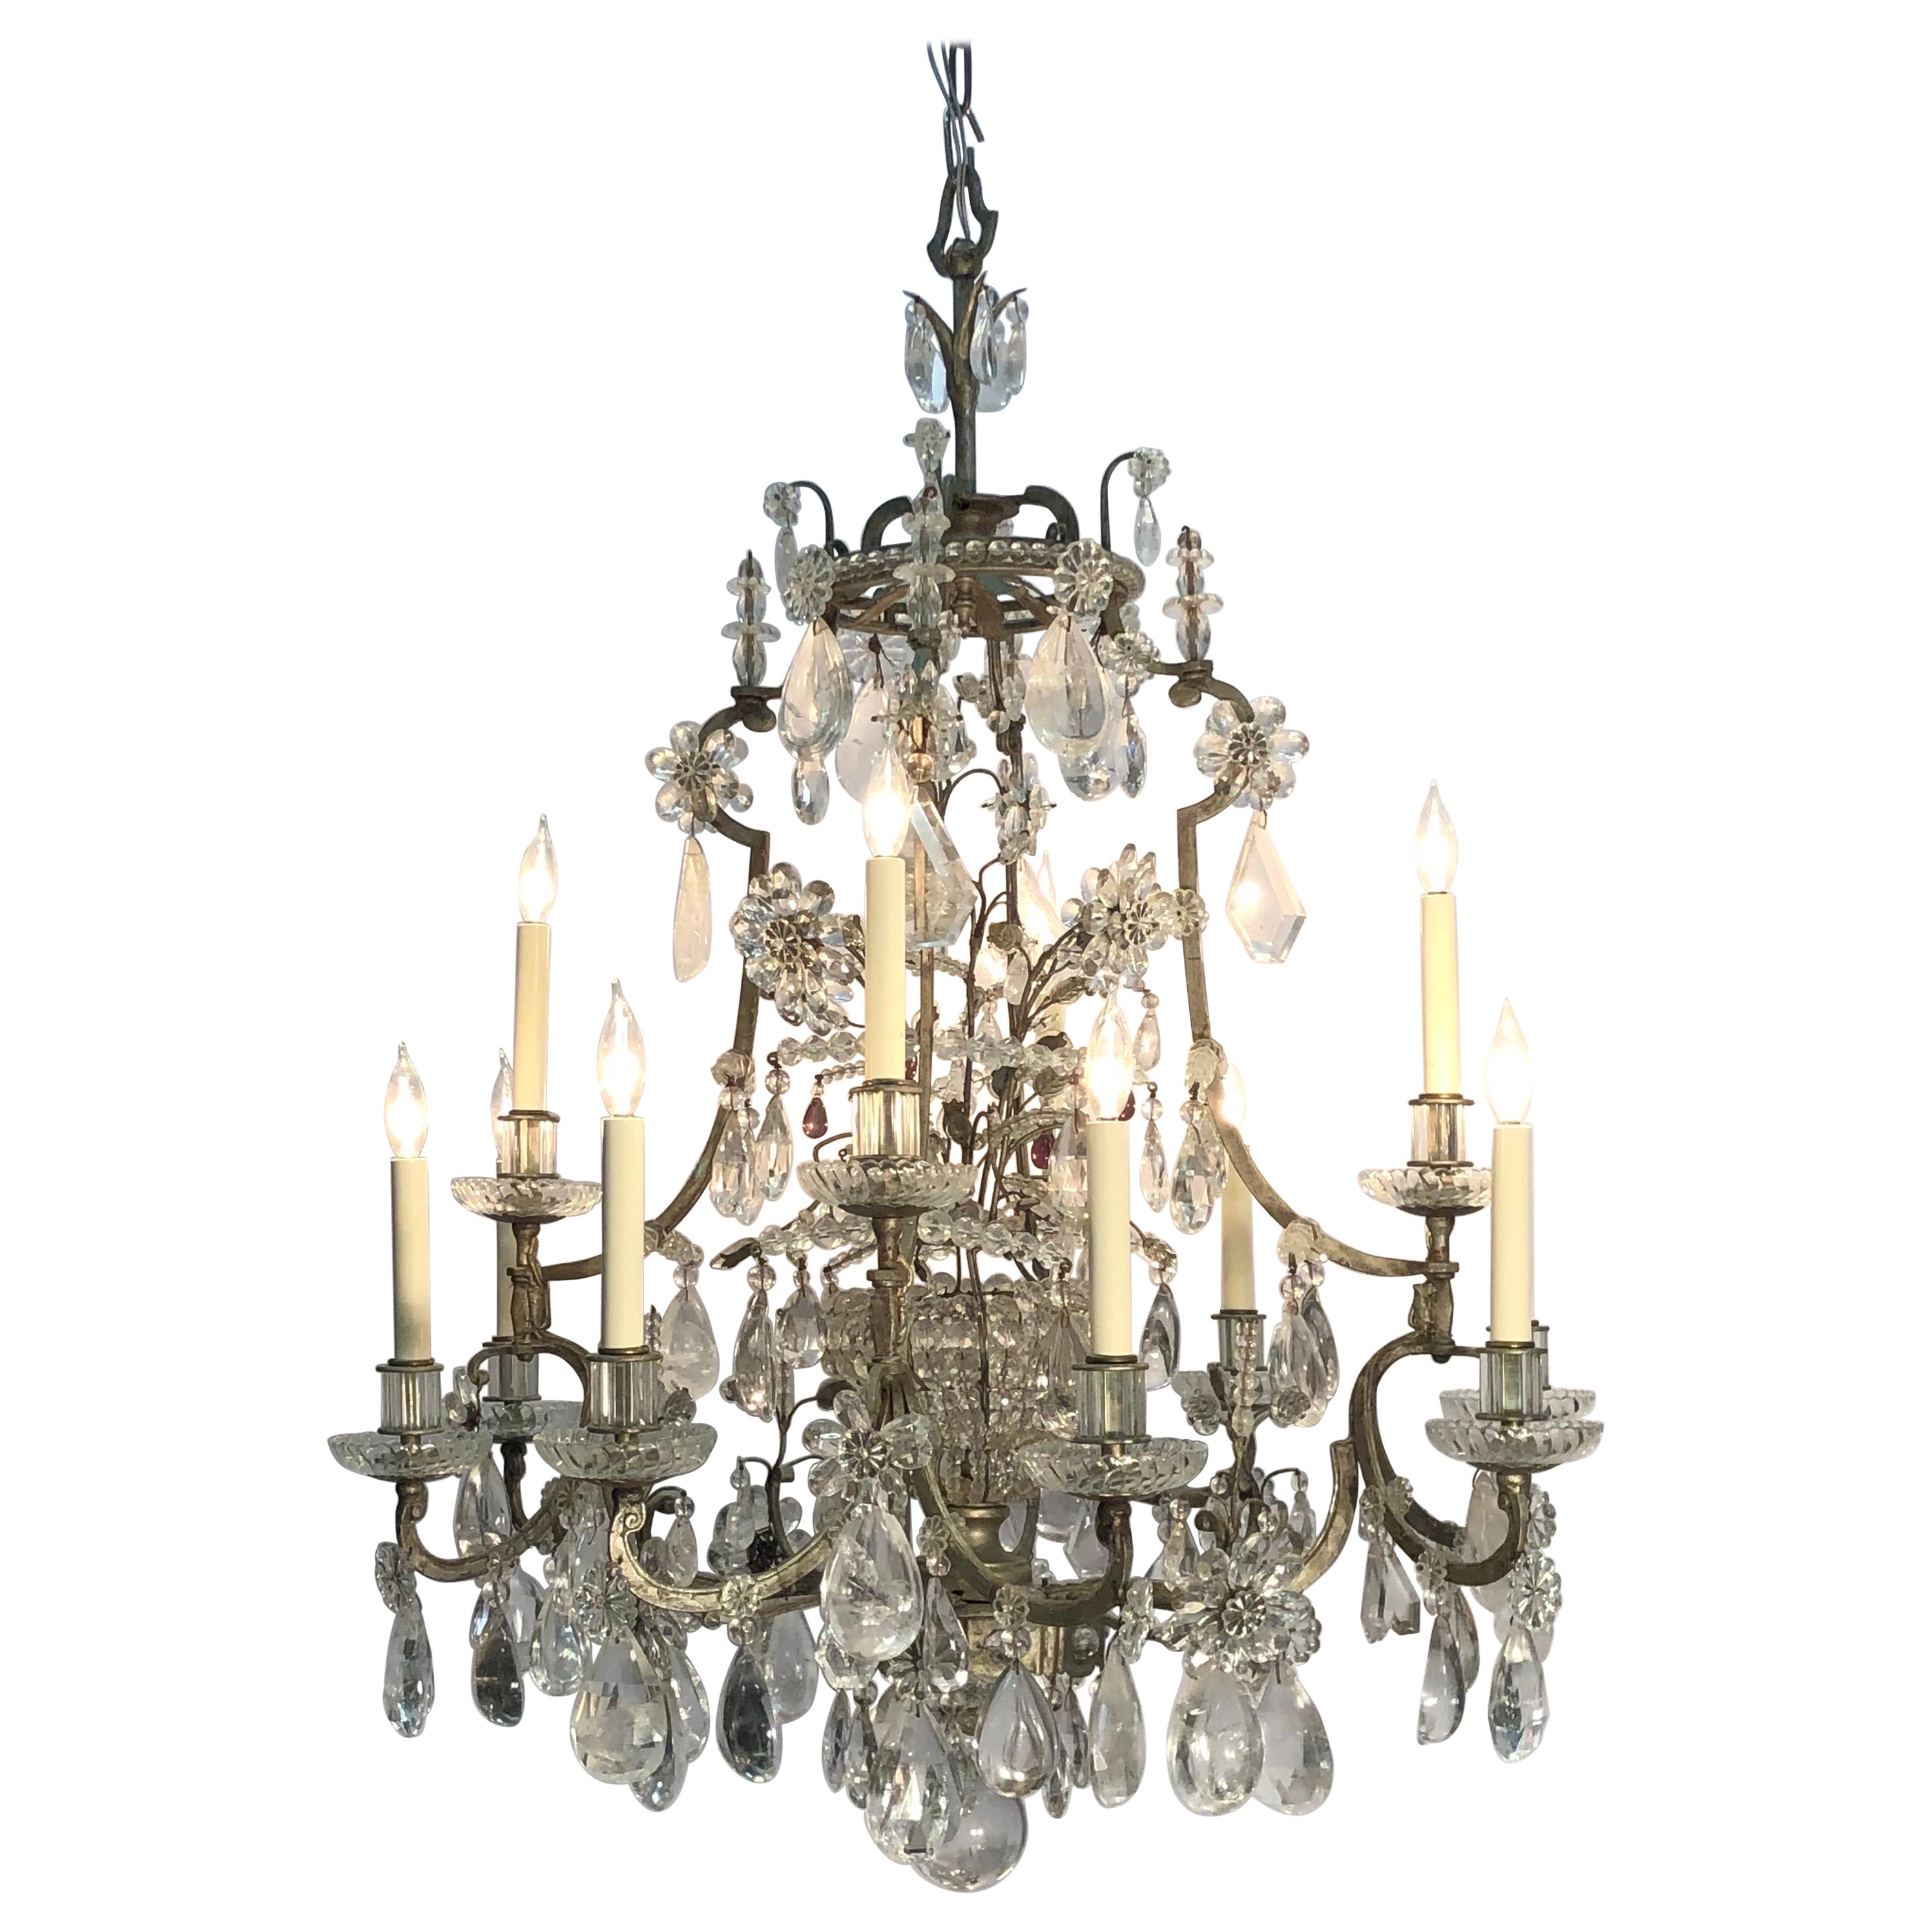 Maison Baguès attributed, Wrought Iron Rock Crystal 12 Light Chandelier